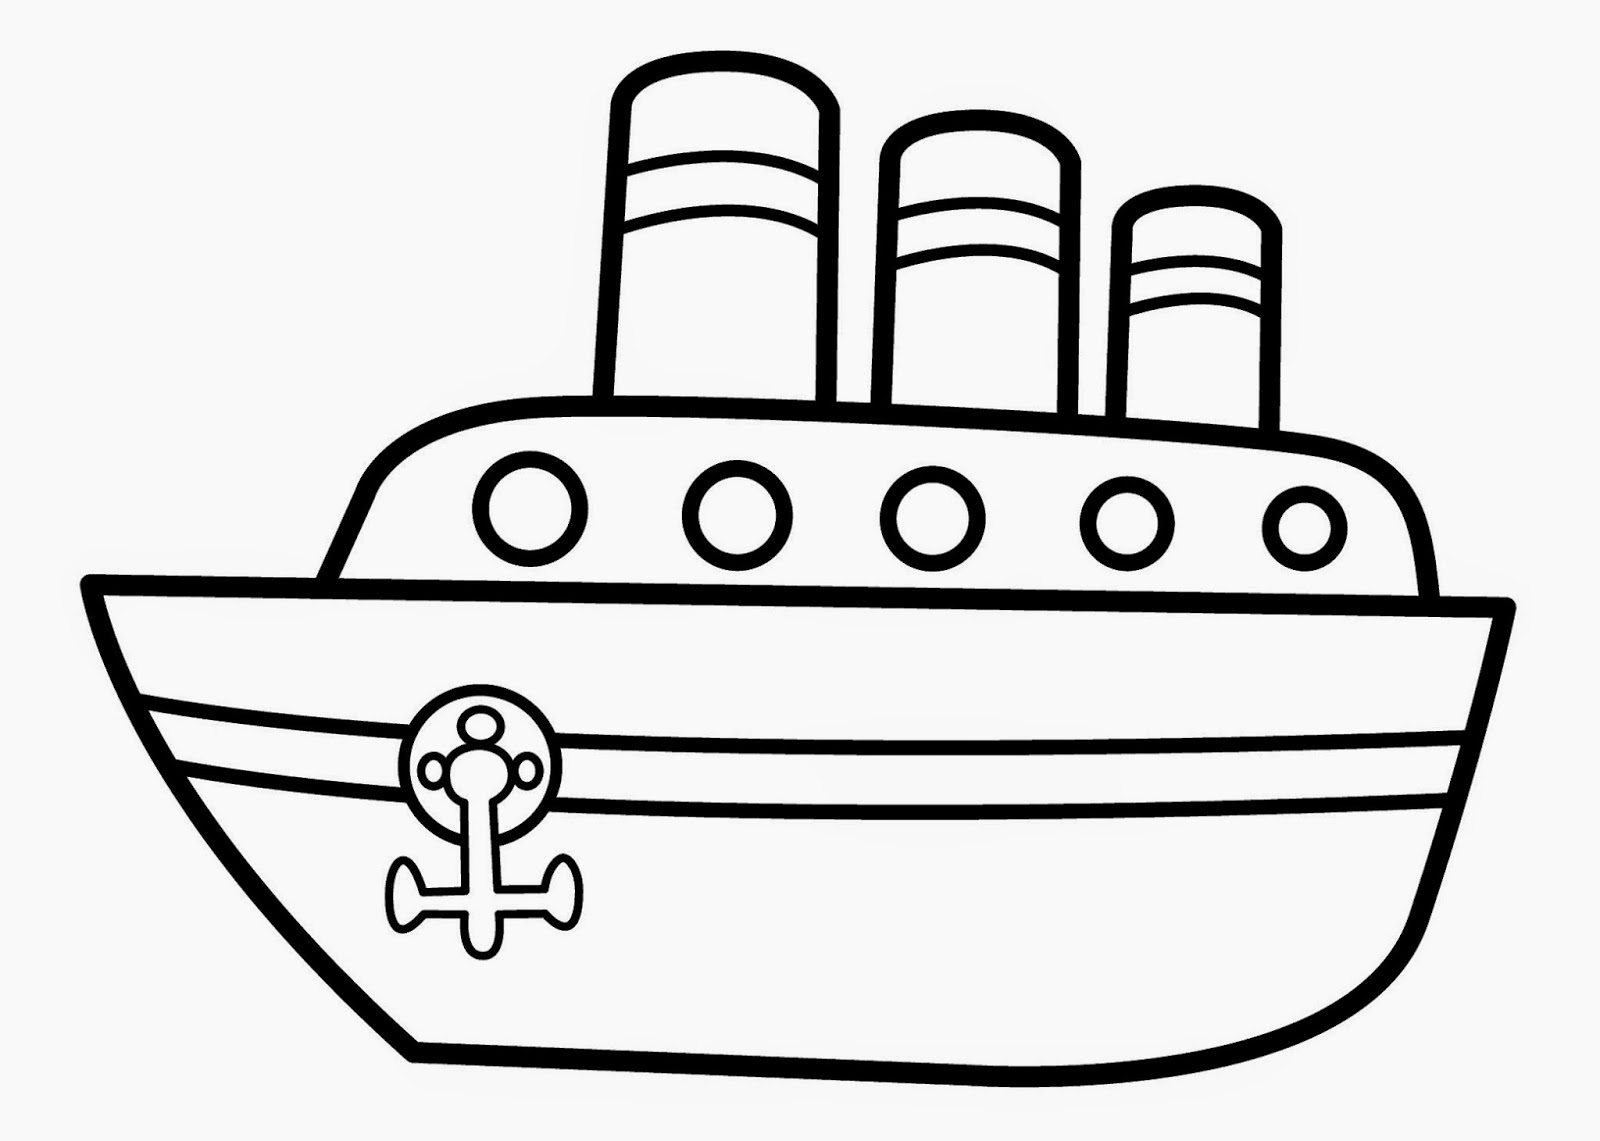 Download Coloring Pictures Of Air Transportation For Preschool ...